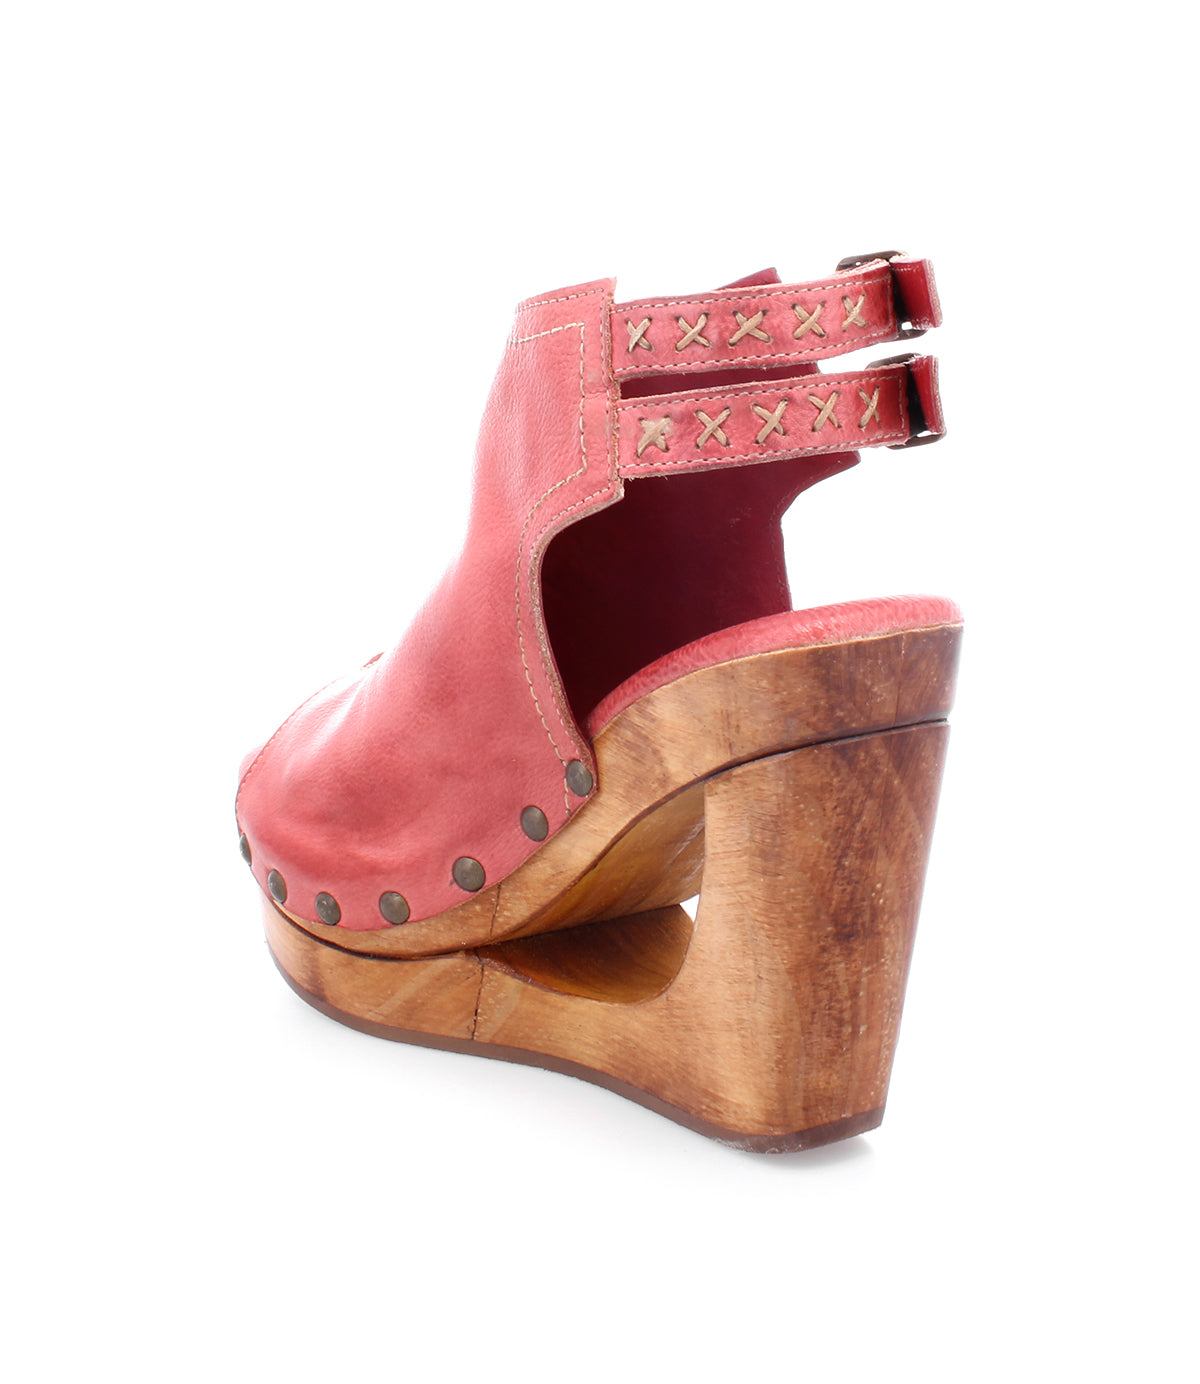 A Bed Stu Imelda-inspired red wedge shoe with a wooden platform and open-toe design.